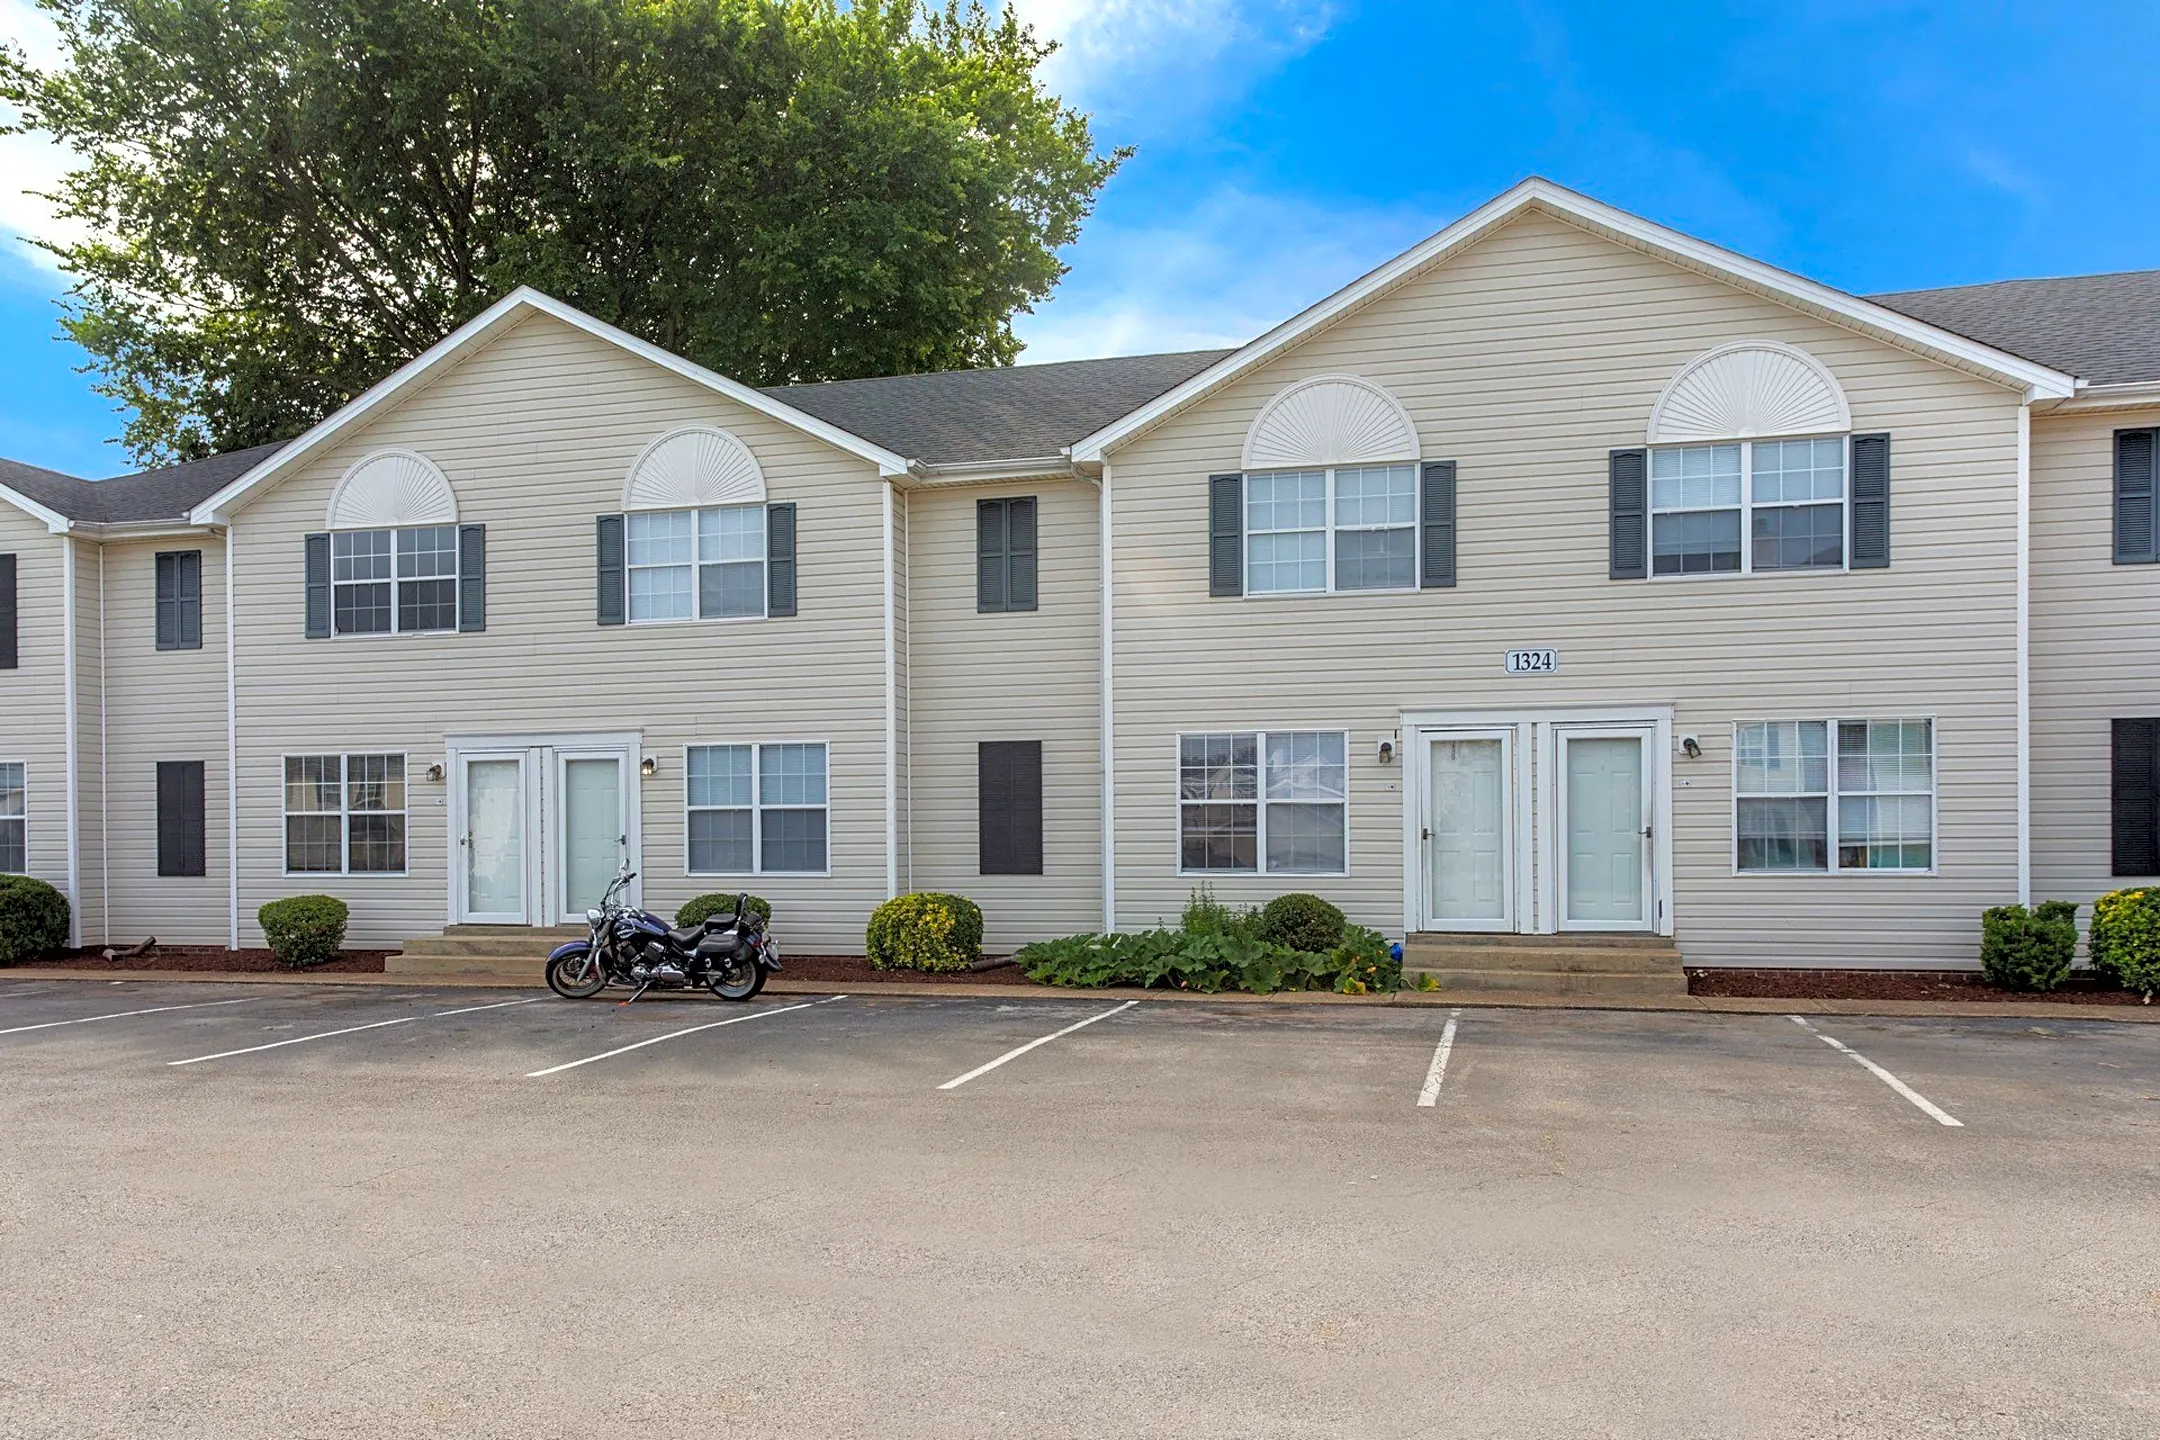 Building - Cave Springs Apartments - Bowling Green, KY